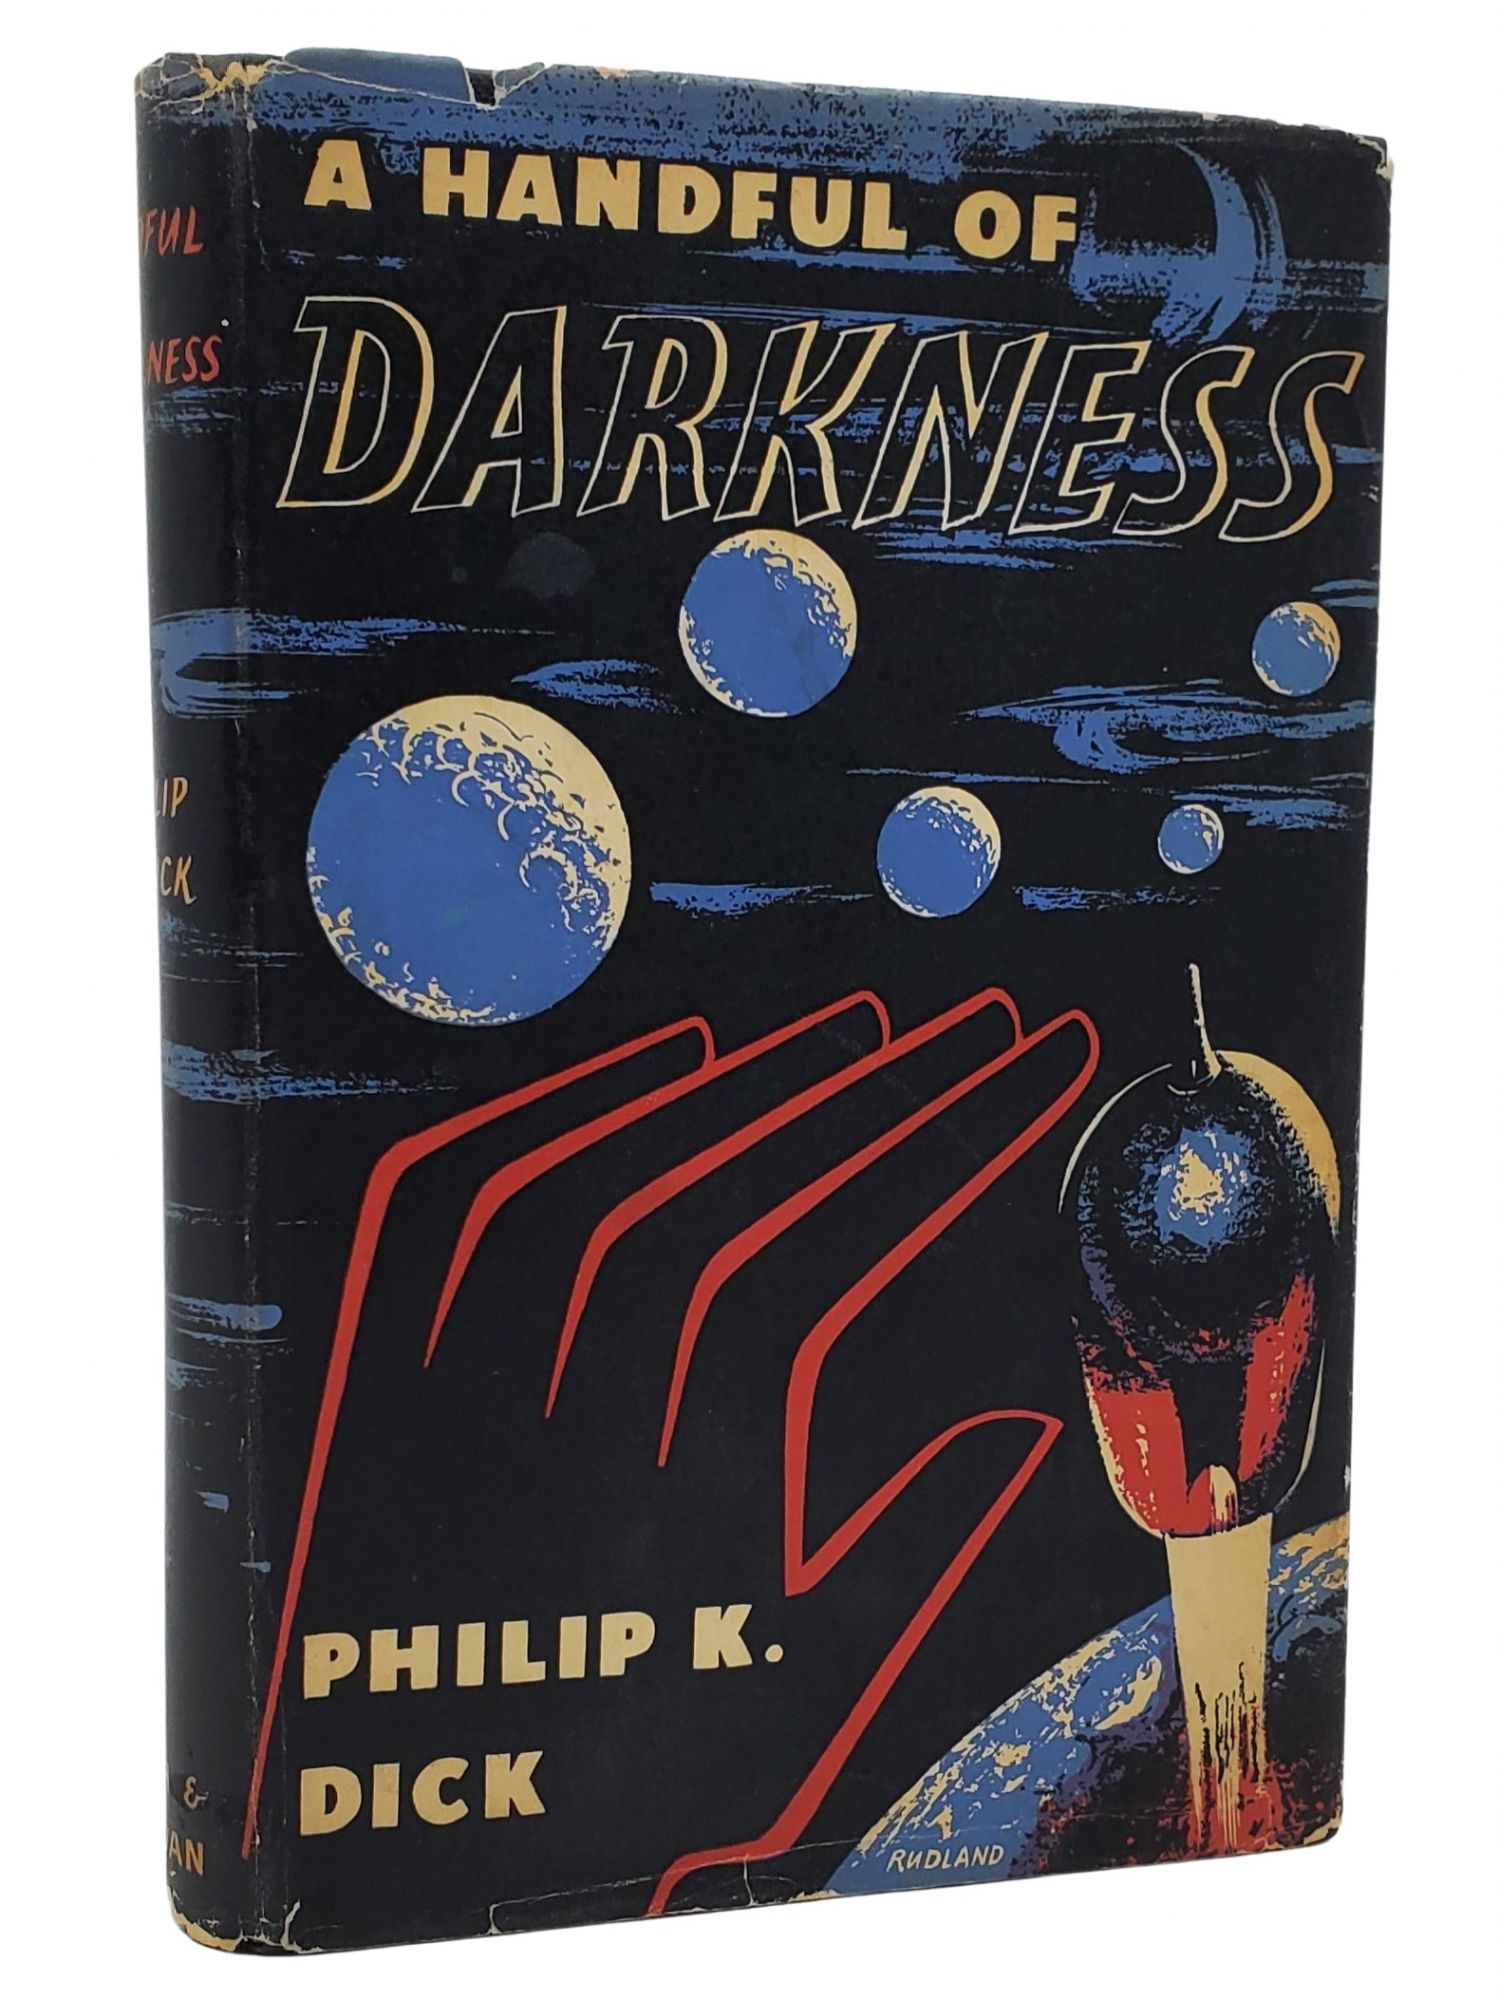 [Book #50579] A HANDFUL OF DARKNESS [FIRST ISSUE]. Philip K. Dick.